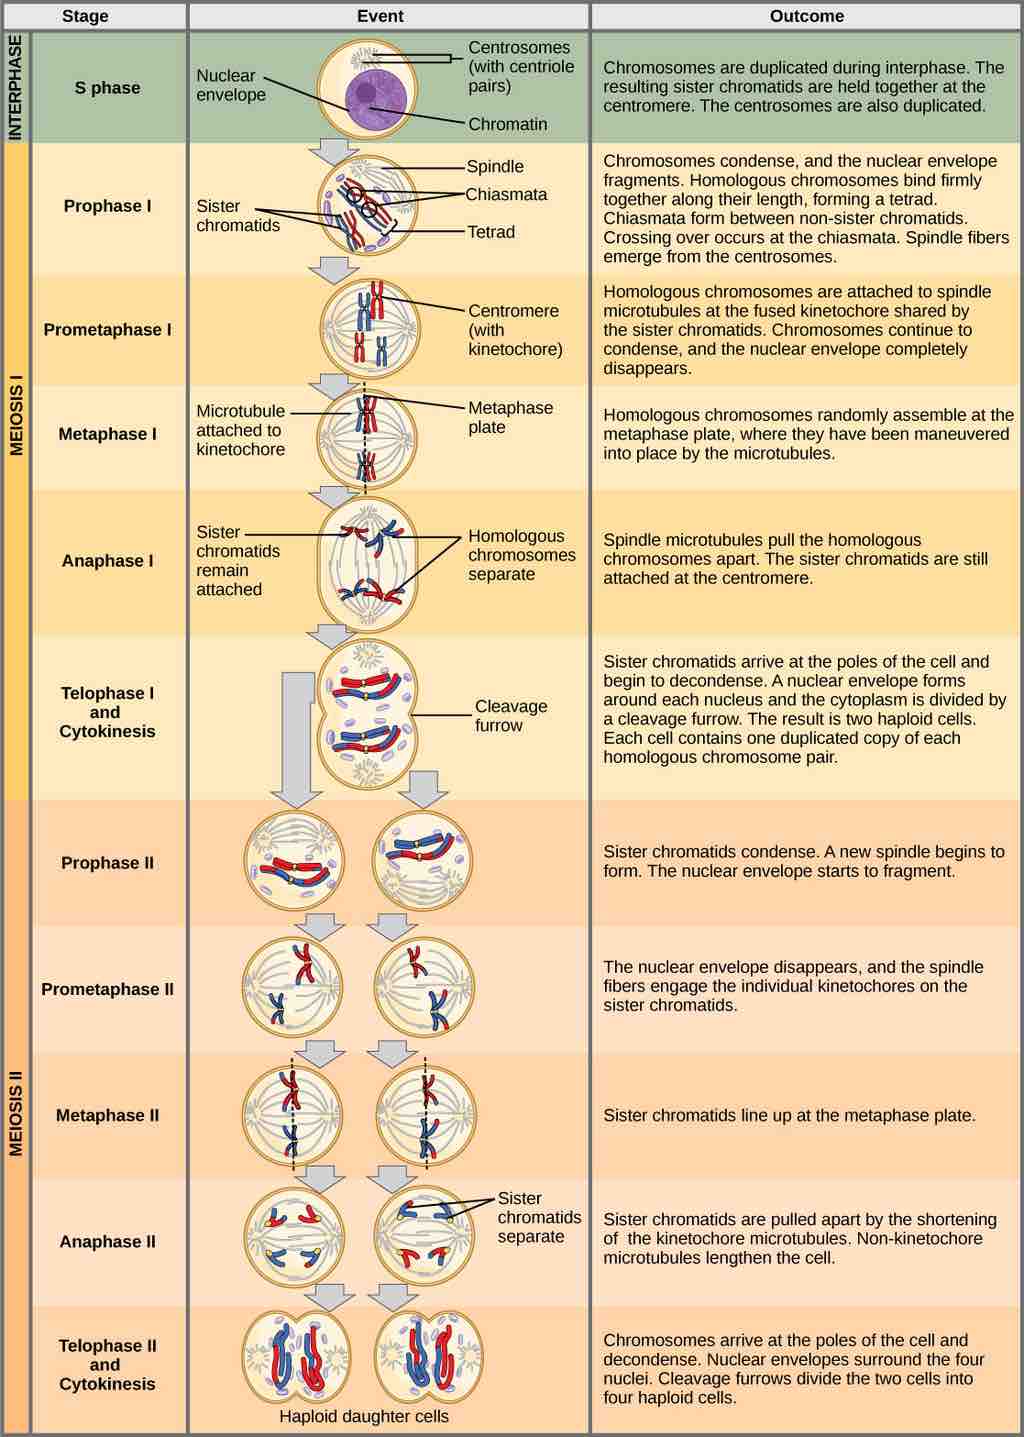 Complete Stages of Meiosis